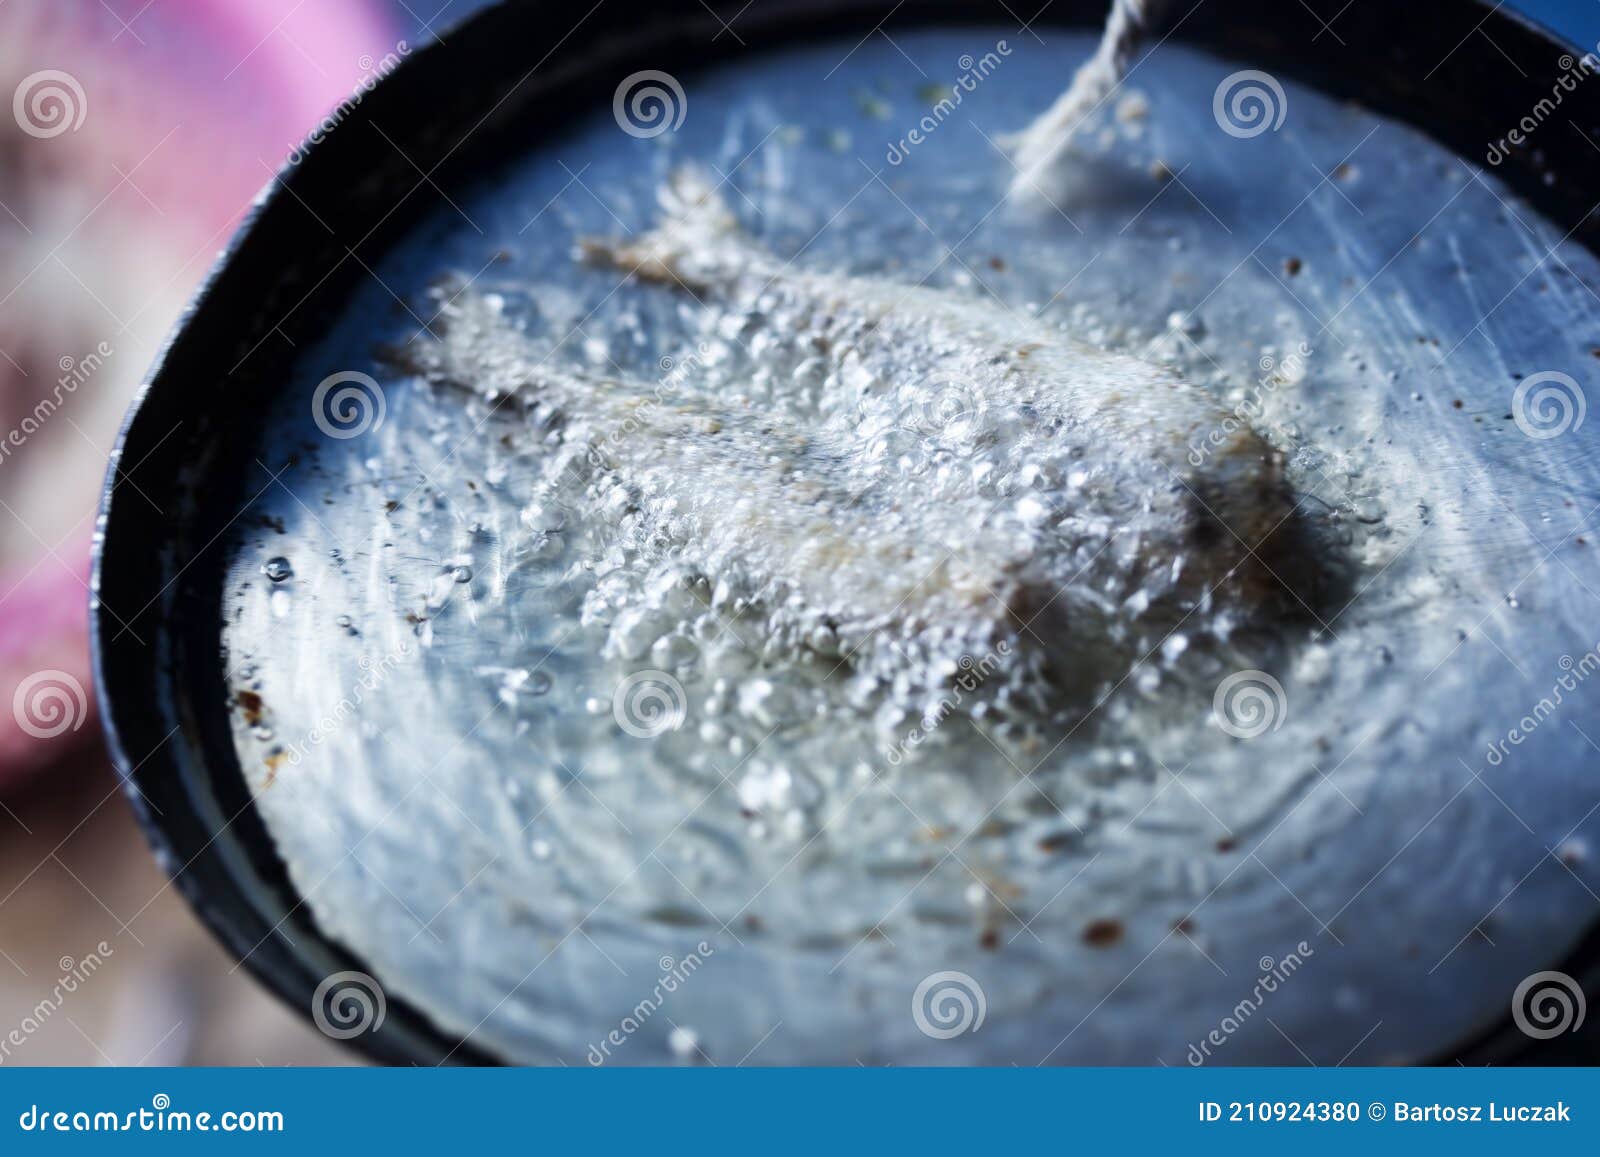 frying small sardines fish, chefchouen, morocco